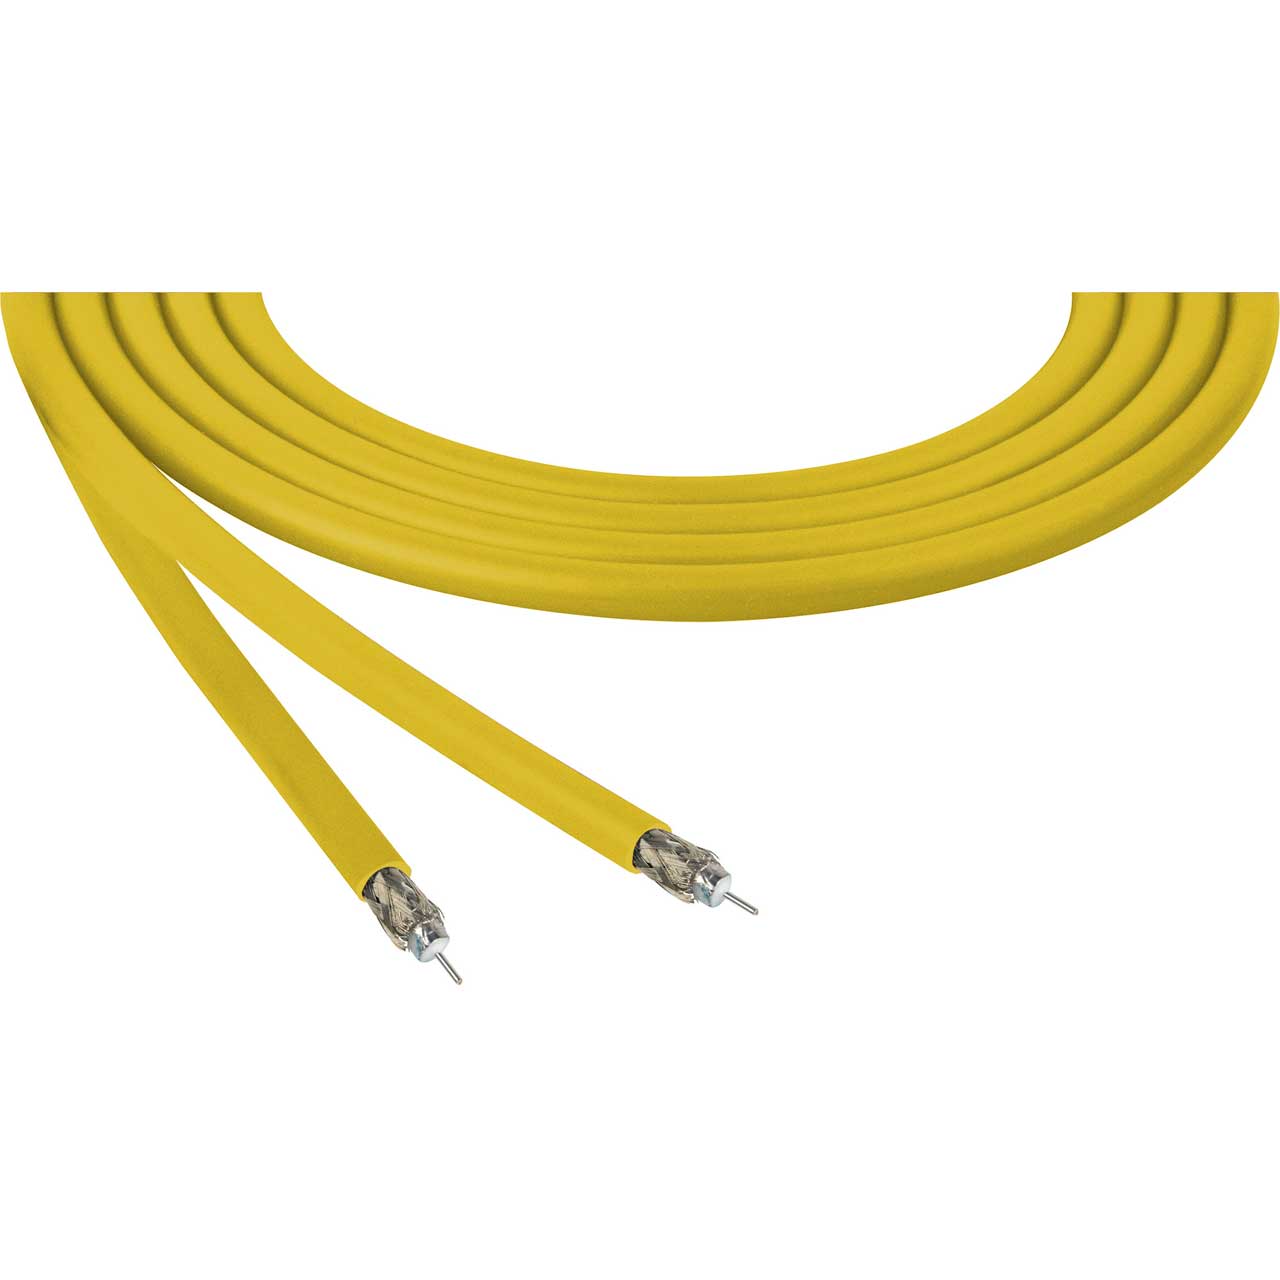 Belden 4694R RG6 12 GHz 4K UHD 75 Ohm 18 AWG Precision Video Cable - Yellow - 1000 Foot  4694R 0041000